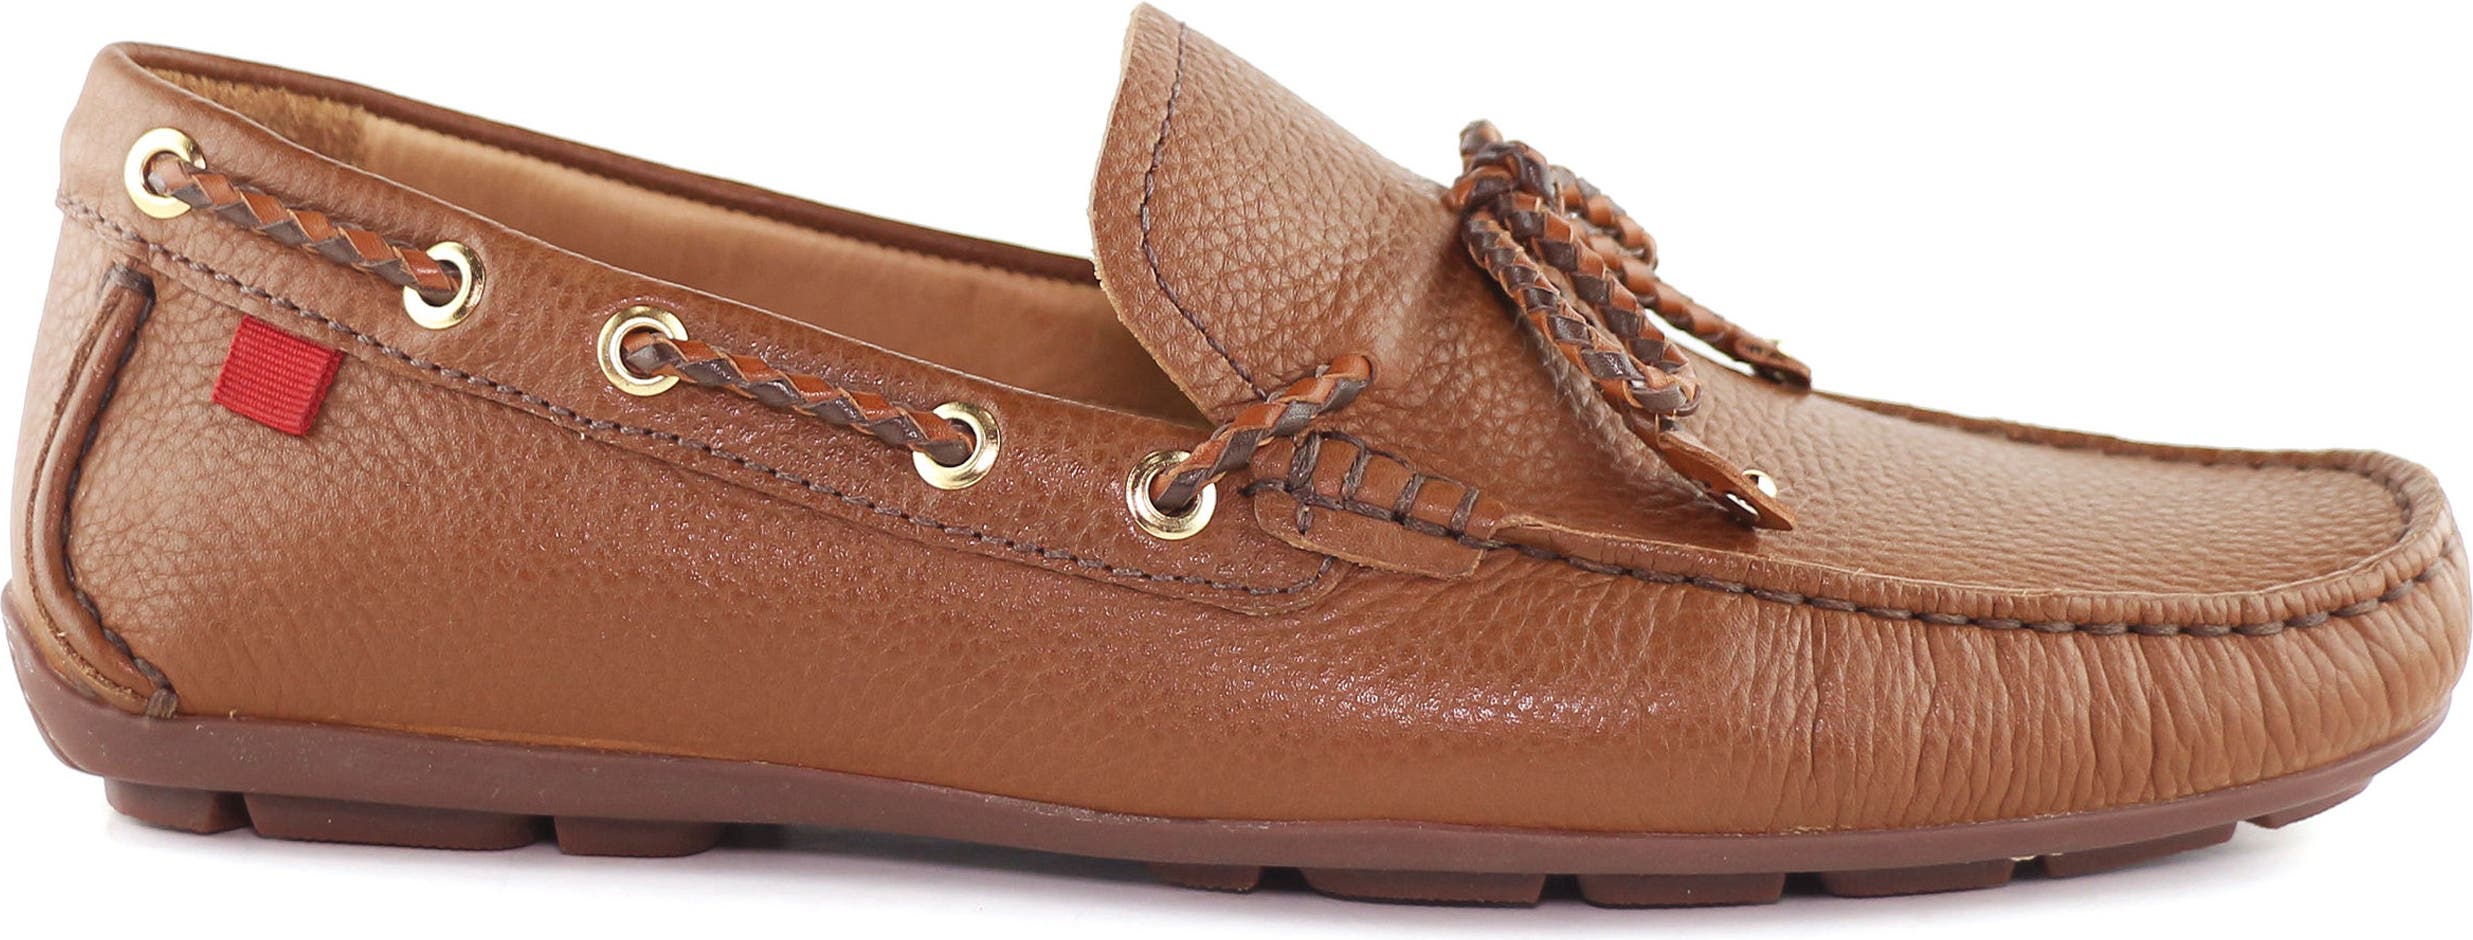 Women's Shoes Marc Joseph CYPRESS HILL Driving Moccasin Leather CLOUD NAPA 